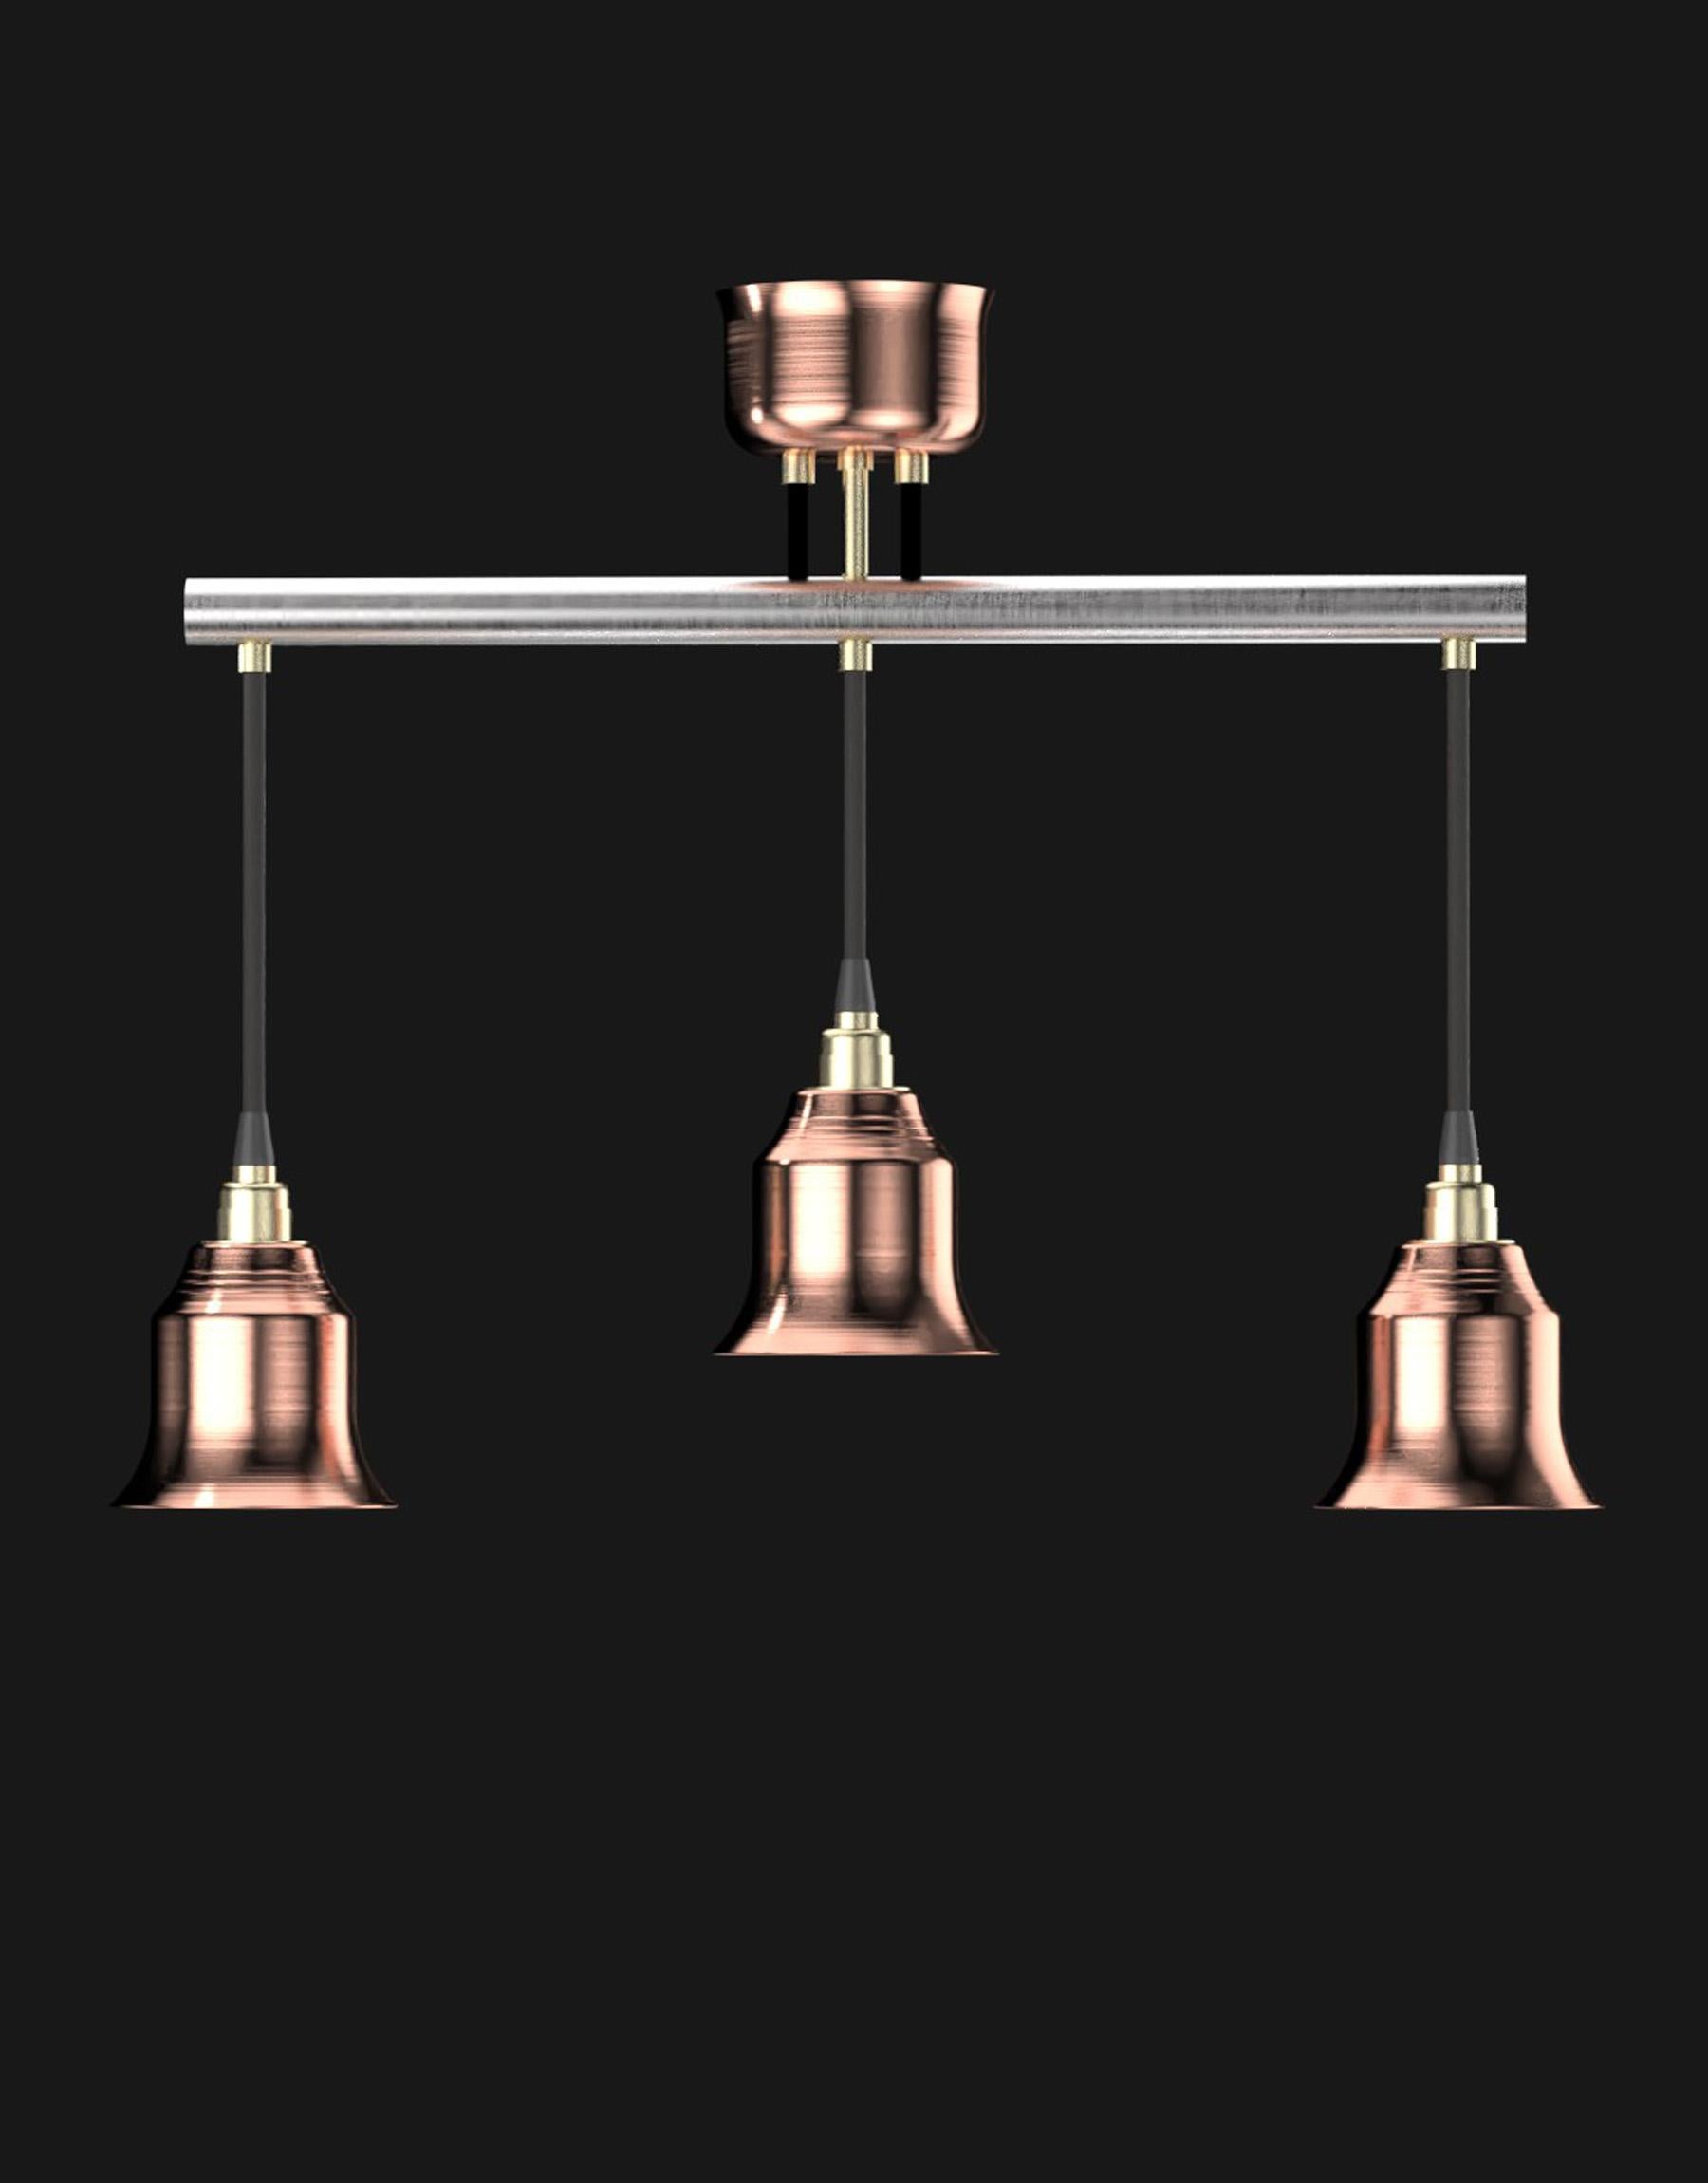 Hand-Crafted Edimate Stainless Steel / Copper Spot V1 Ceiling Light, Handmade in France For Sale